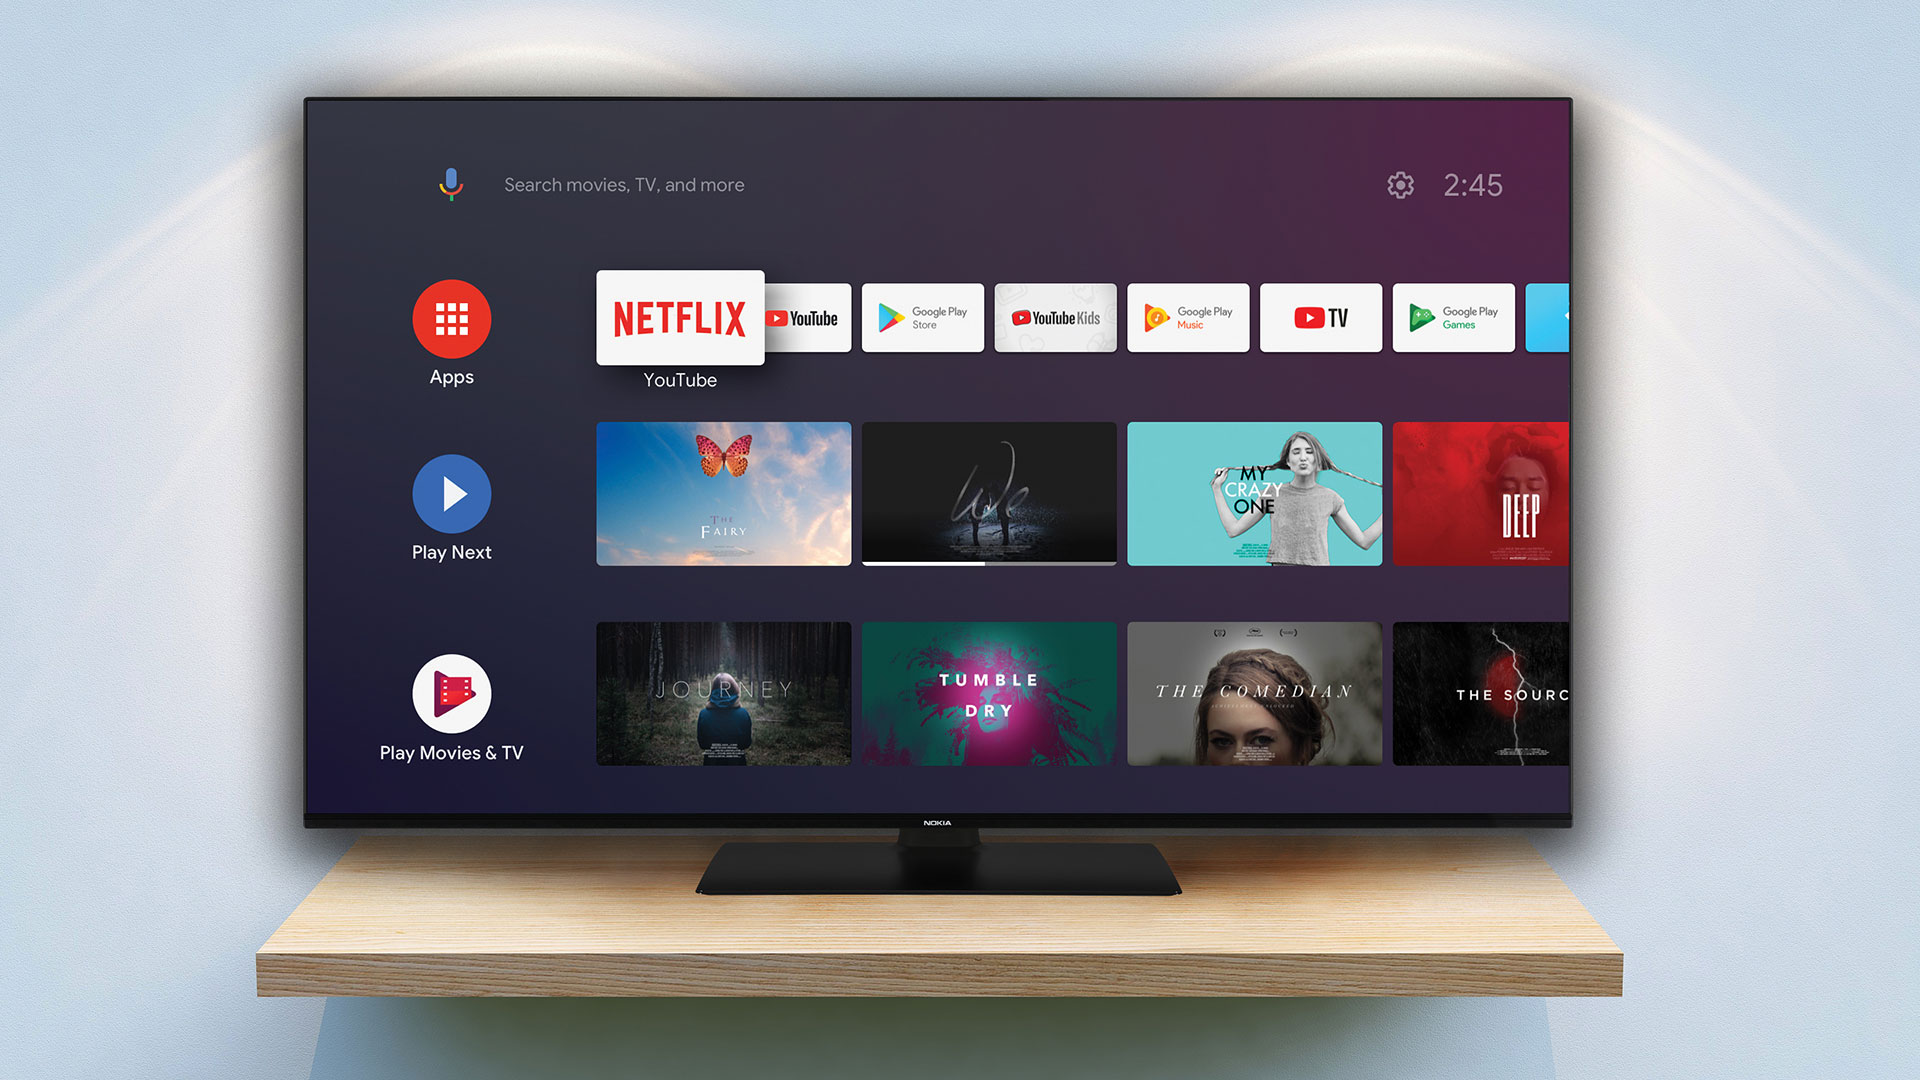 nokia smart tv 5500a with android